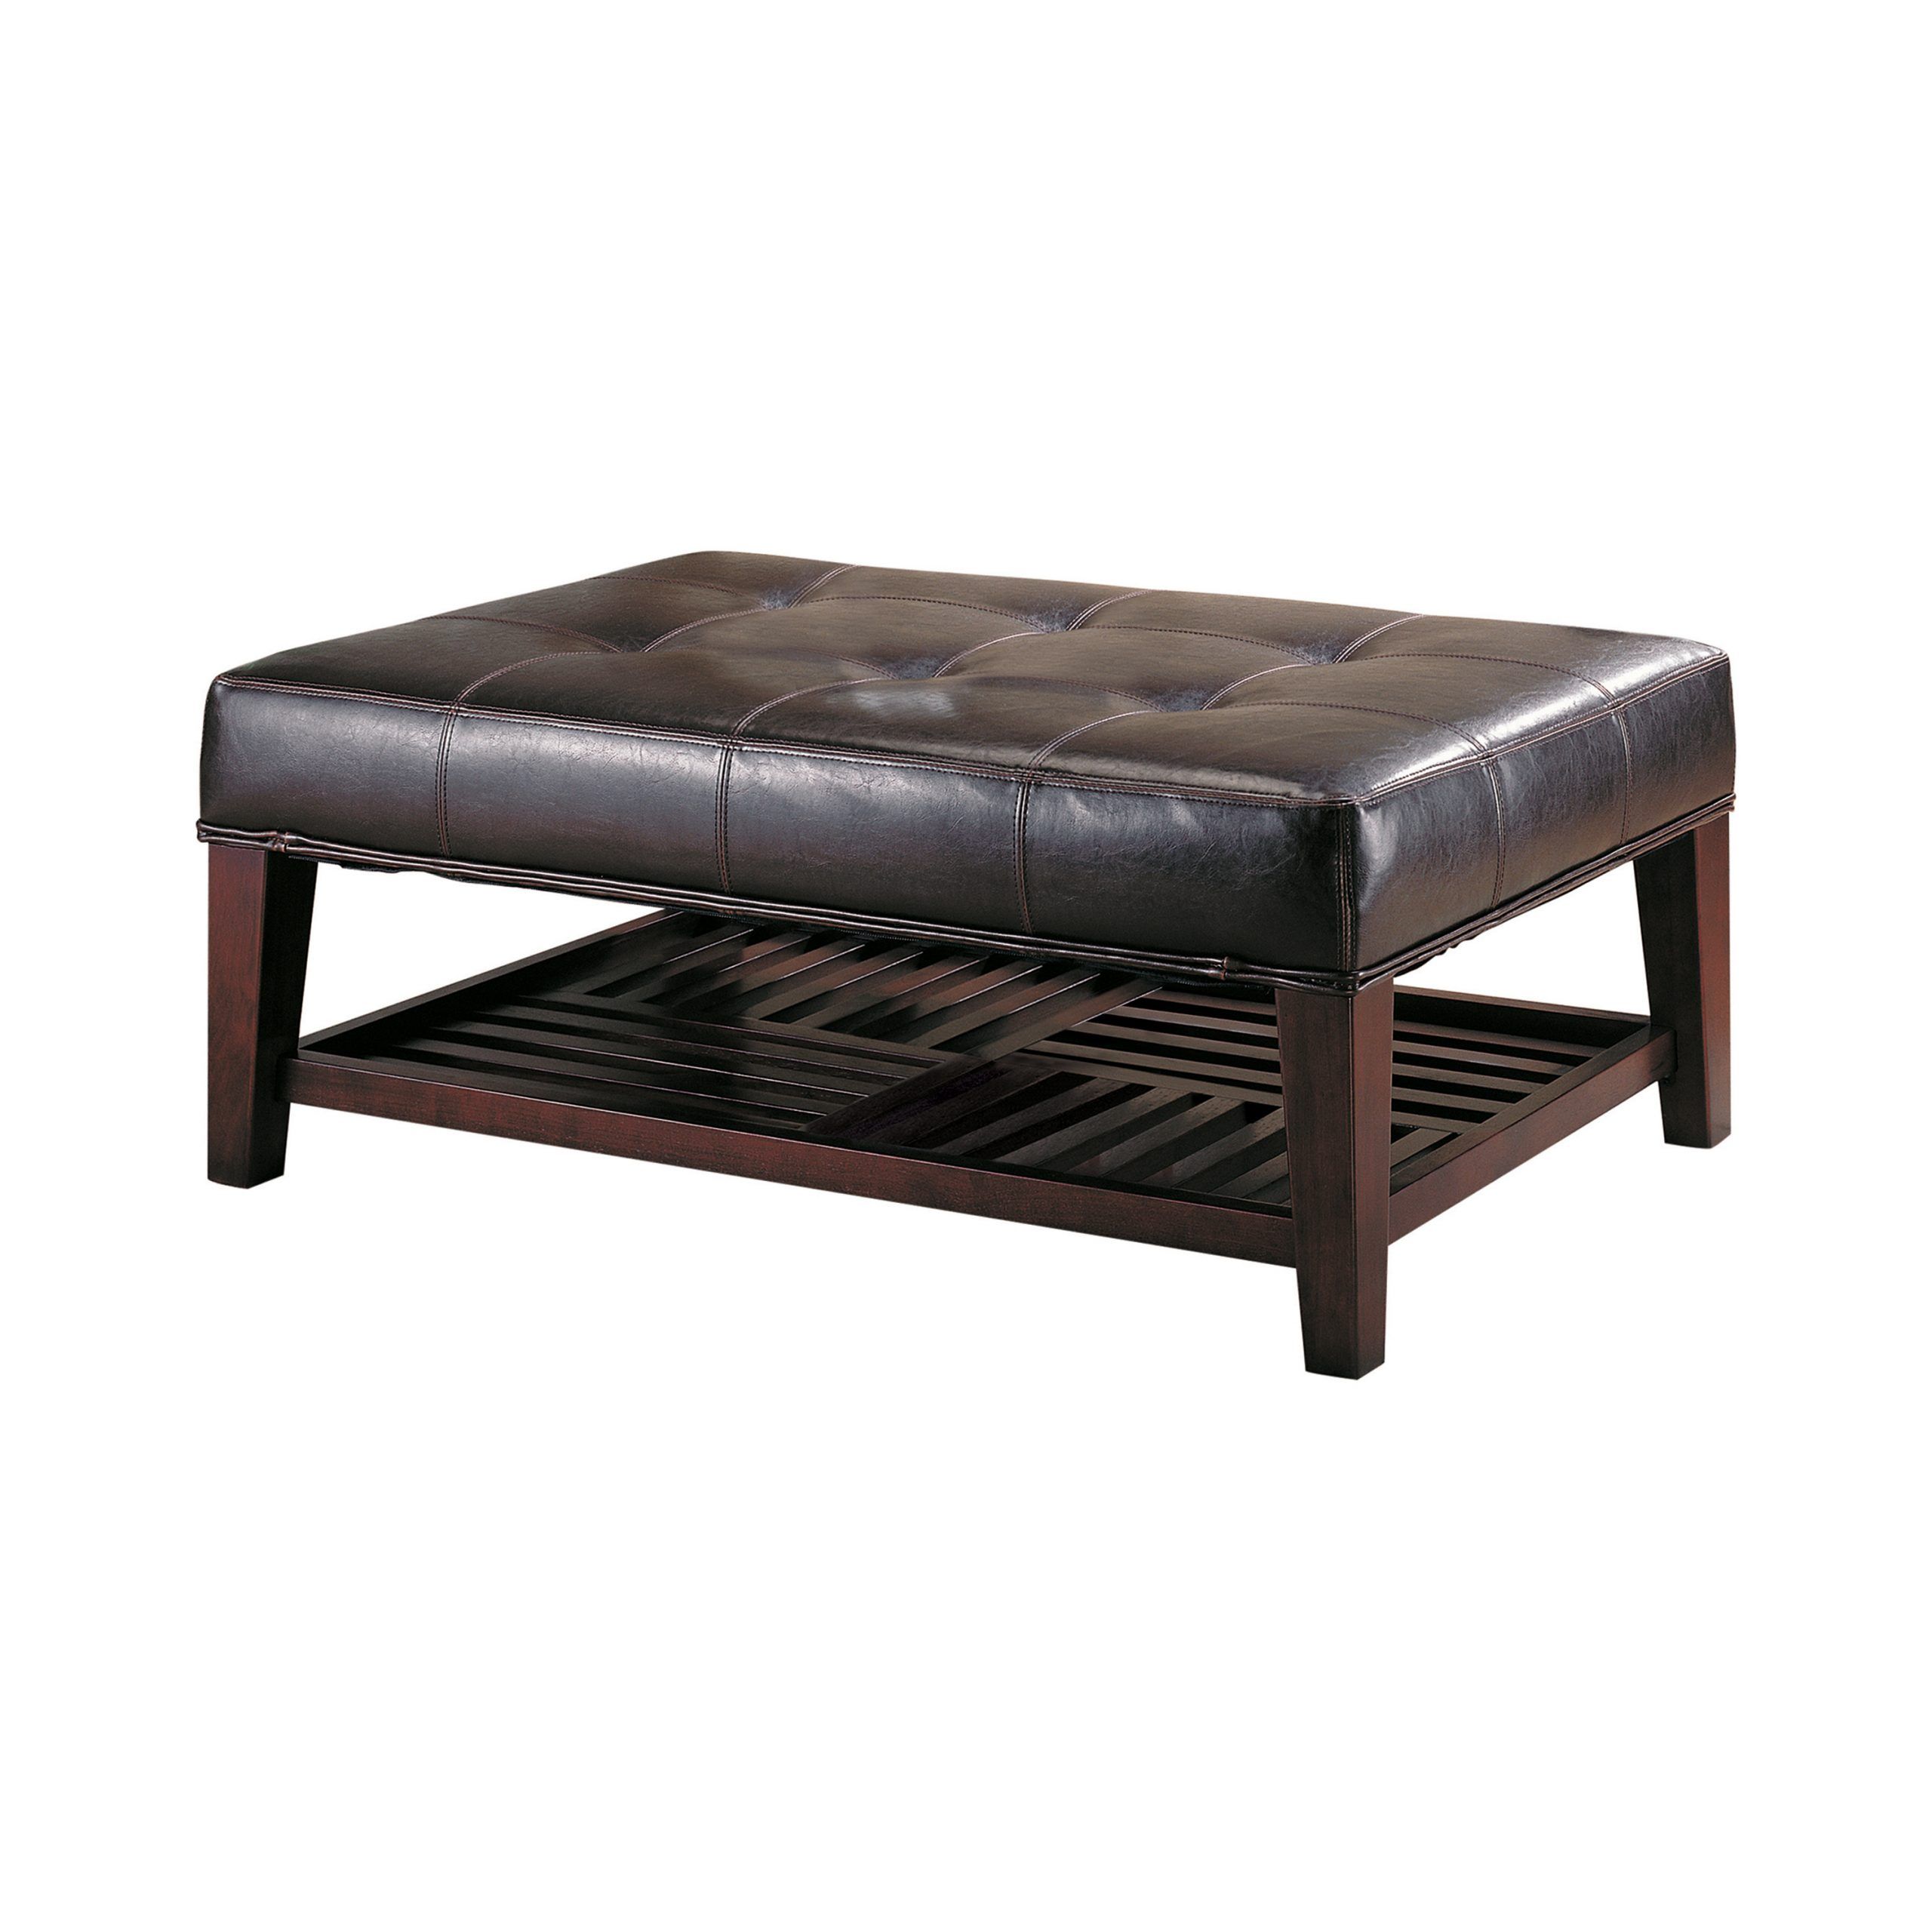 Tufted Ottoman With Storage Shelf Brown – Coaster Fine Furniture For Best And Newest Tufted Ottomans (View 6 of 10)